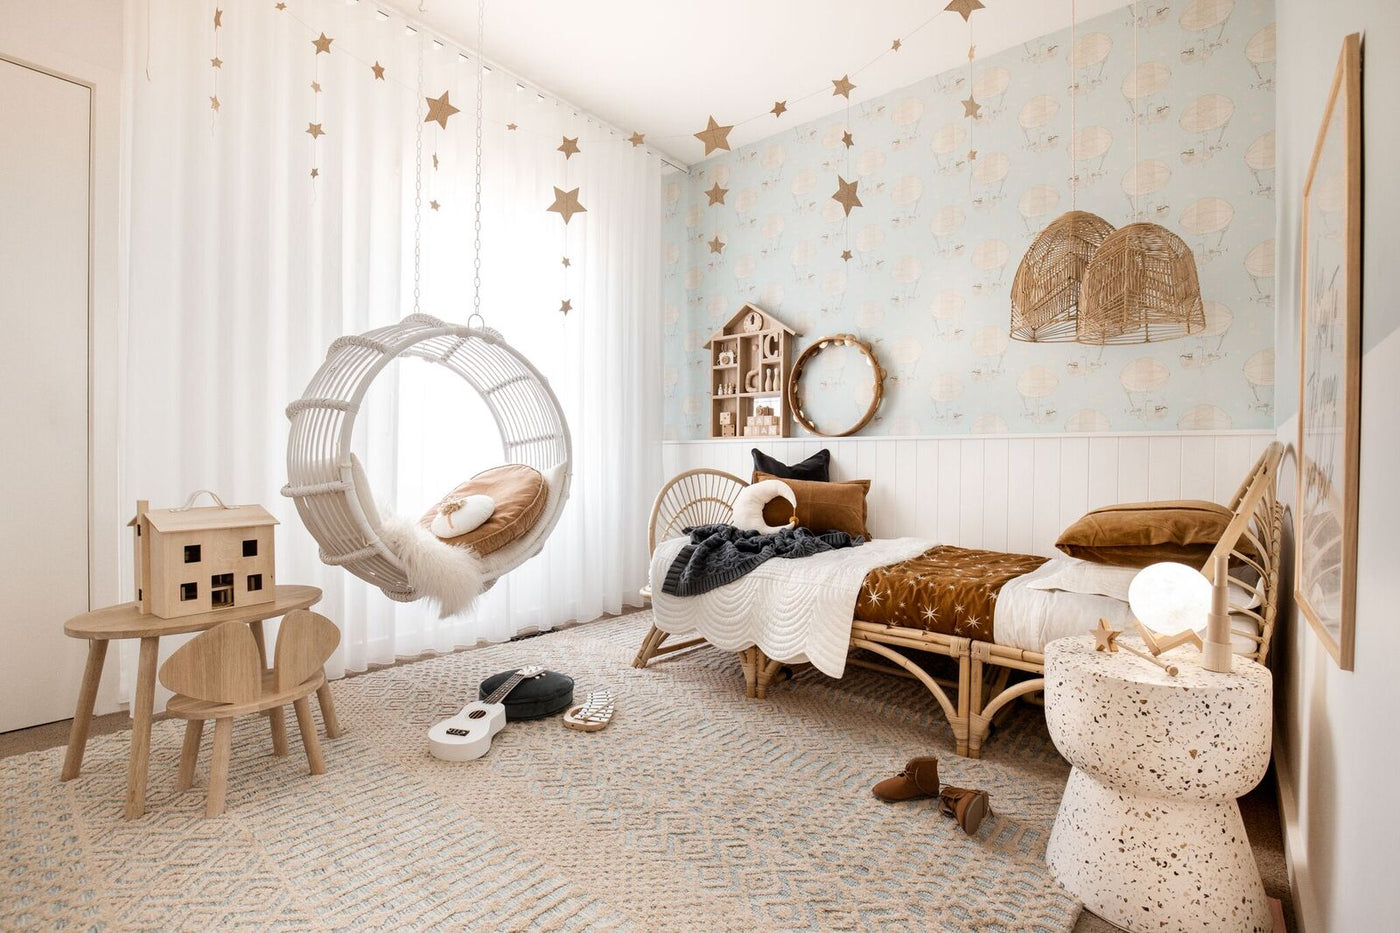 Our Favourite Room Reveals of 2019